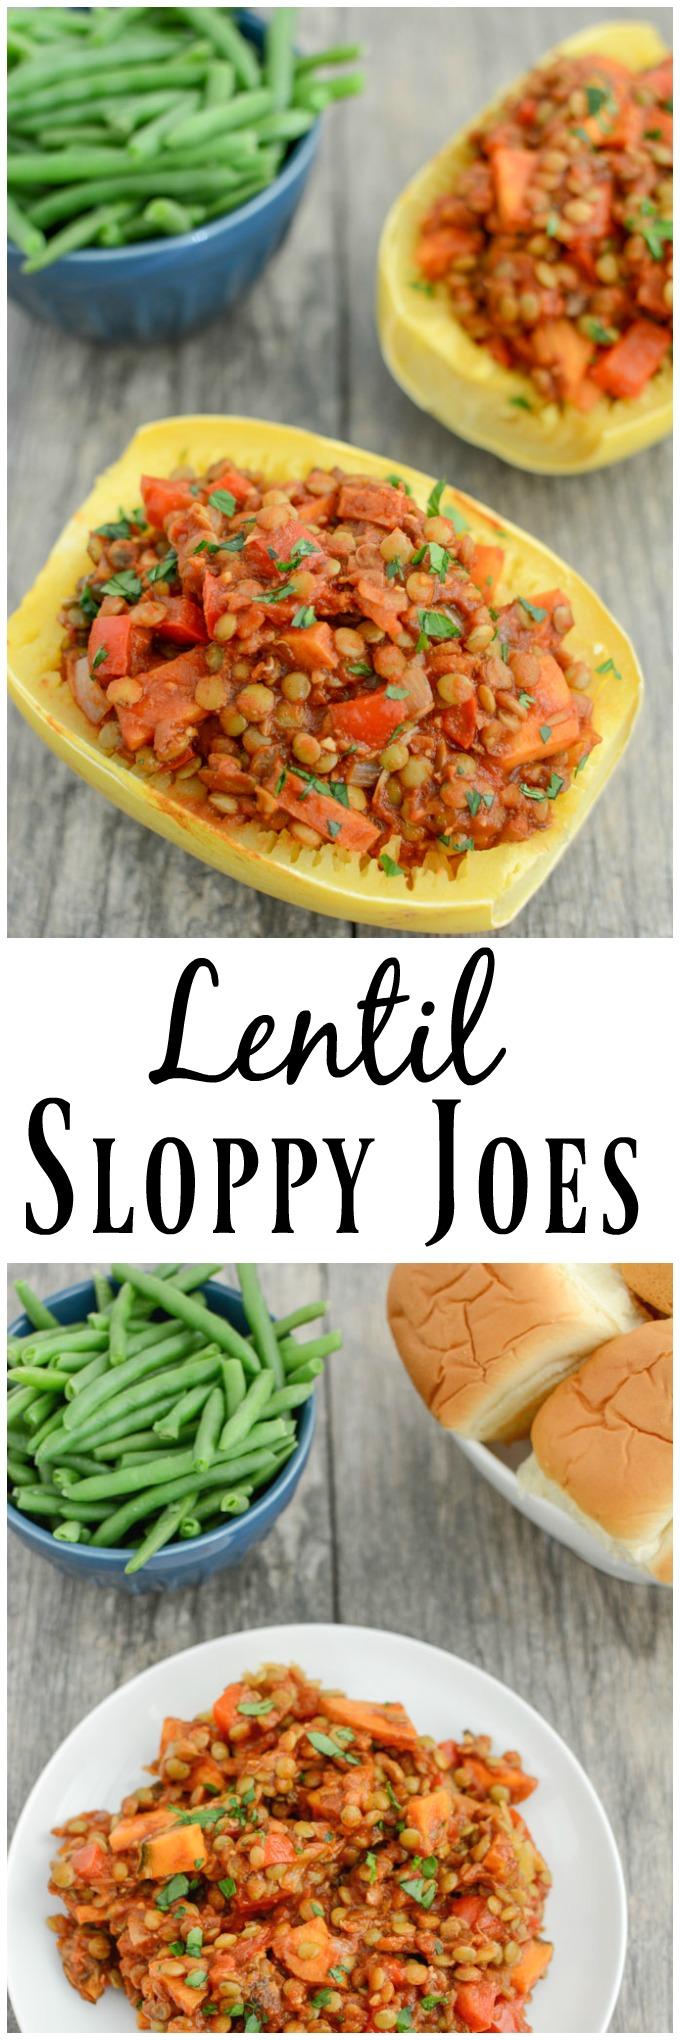 These Lentil Sloppy Joes are a healthy vegetarian recipe that's perfect for lunch or dinner. Serve over spaghetti squash to keep it gluten-free or on a bun!